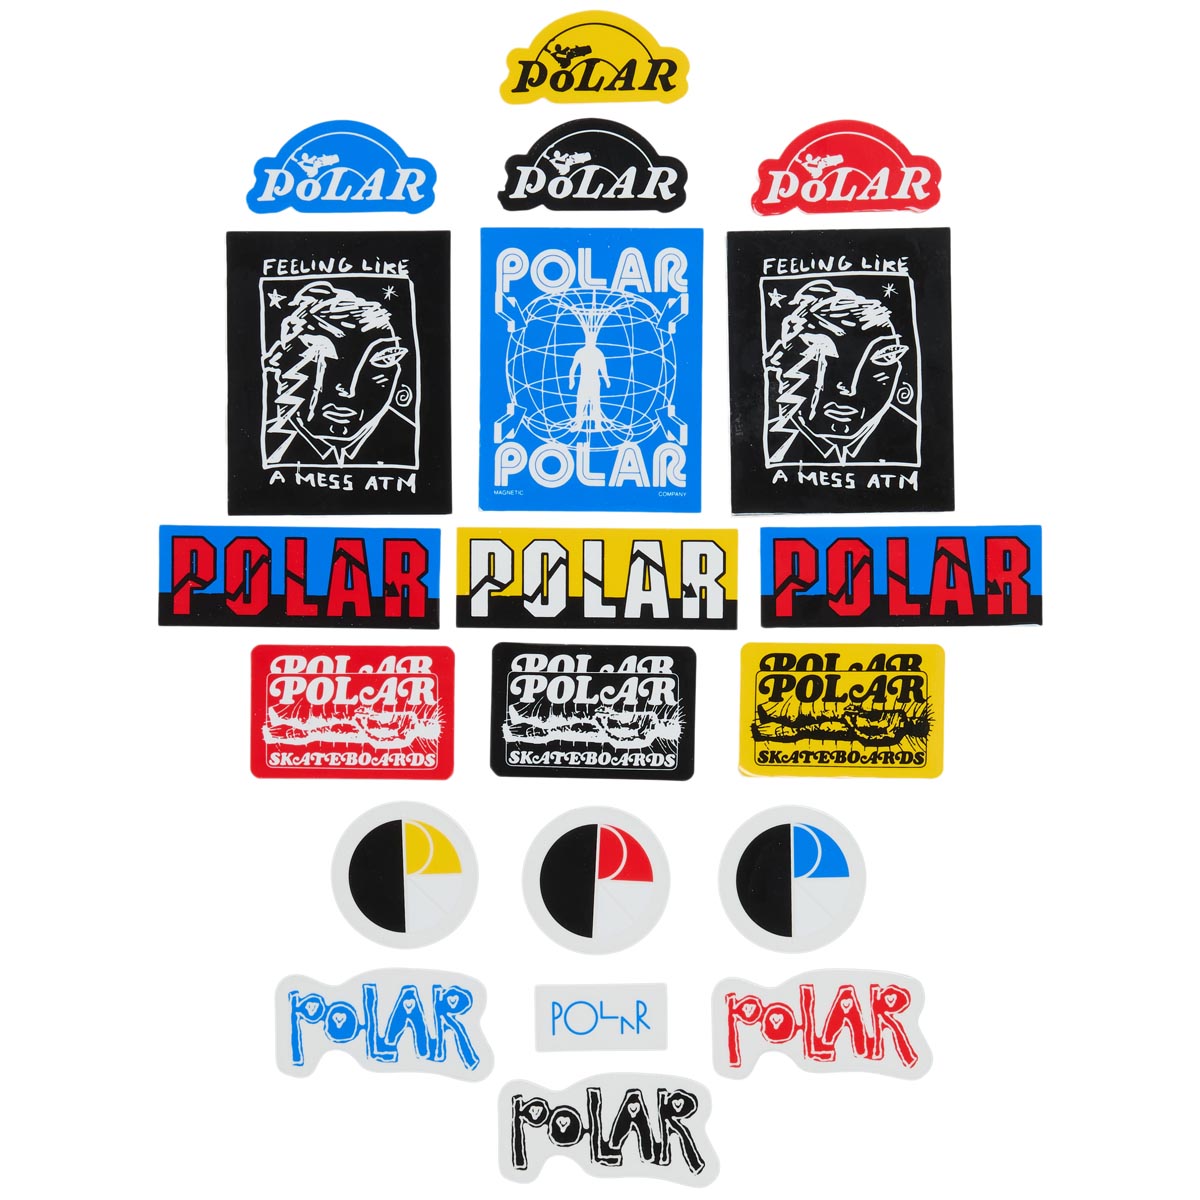 Polar Pack of Stickers - Multi image 2